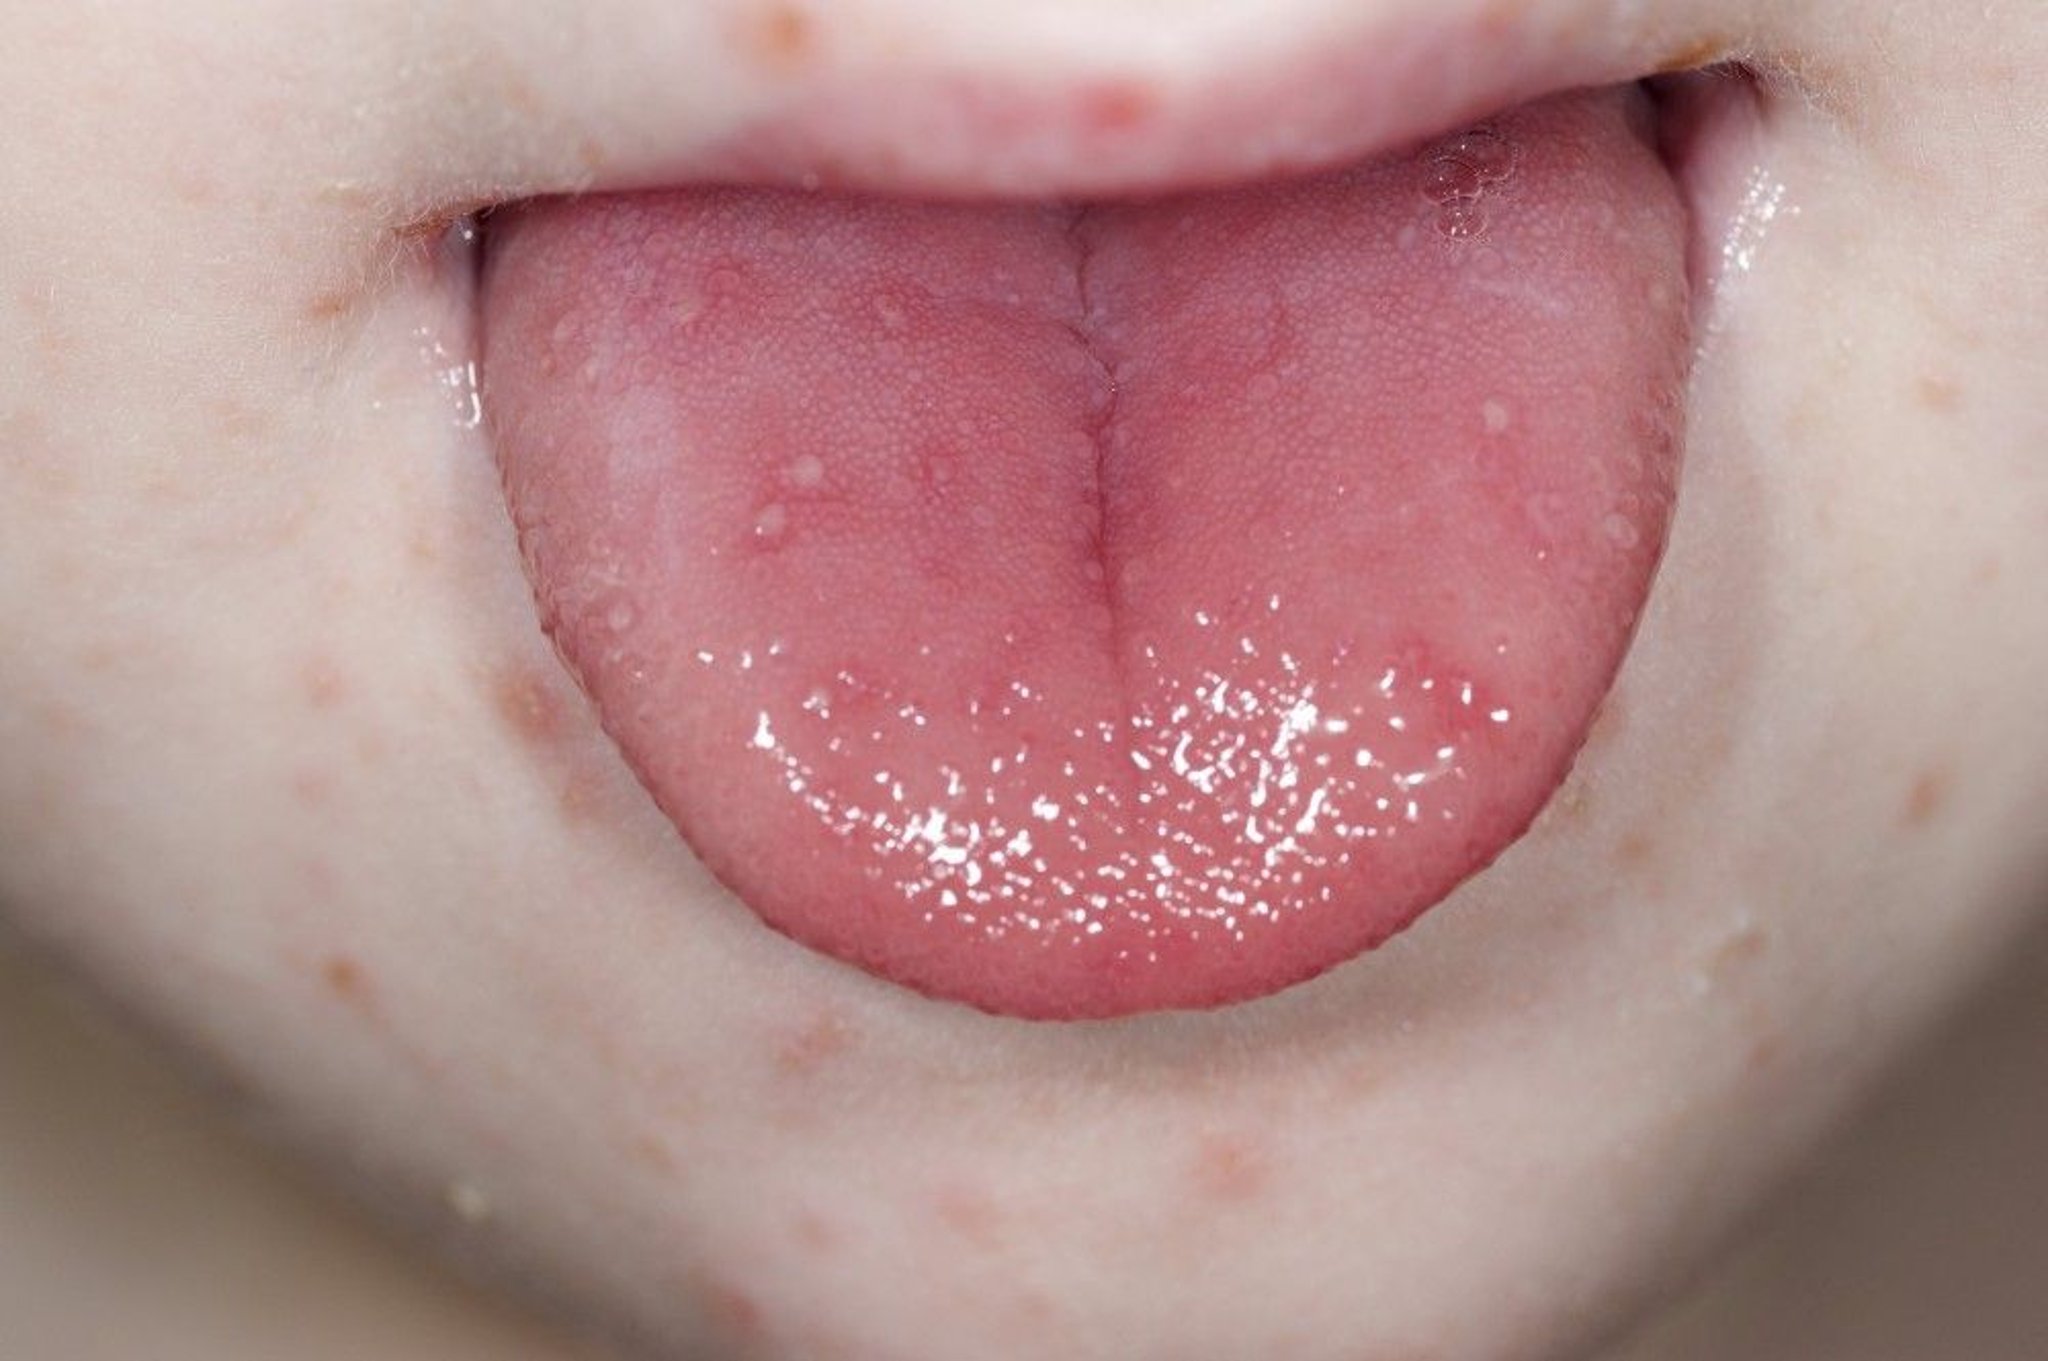 Hand-Foot-and-Mouth Disease (Mouth Sores)